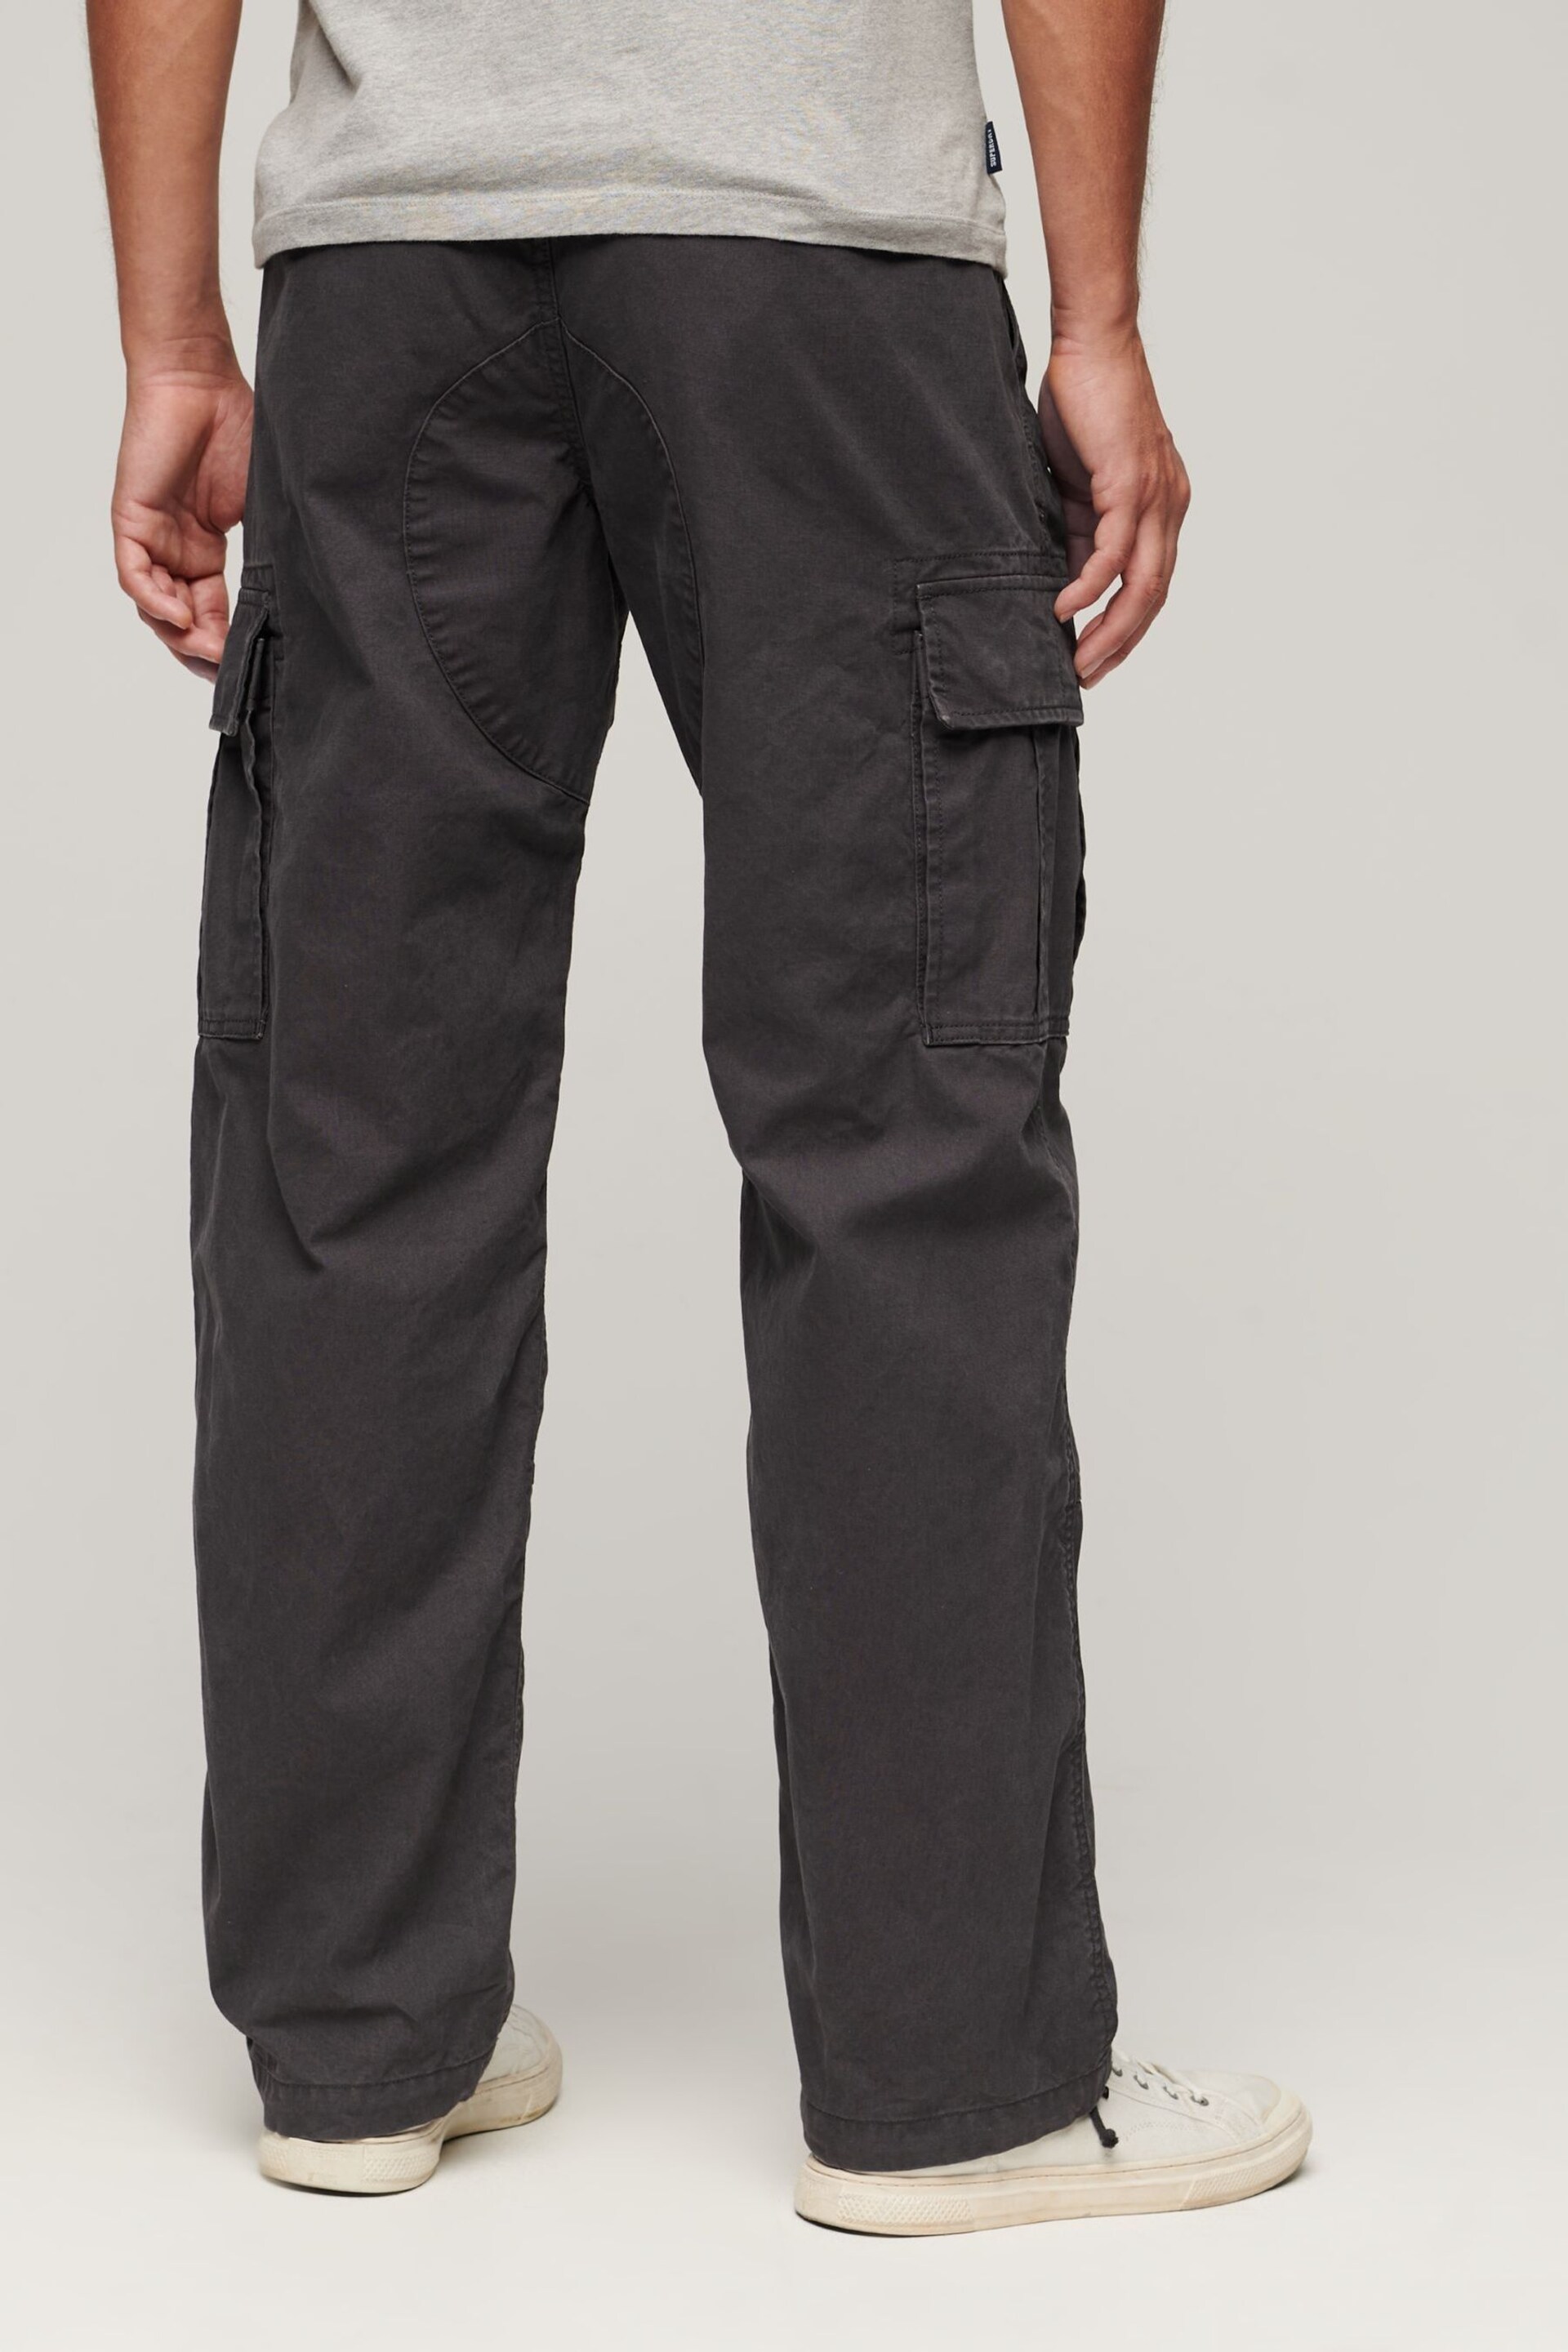 Superdry Grey Vintage Baggy Cargo Trousers - Image 2 of 7